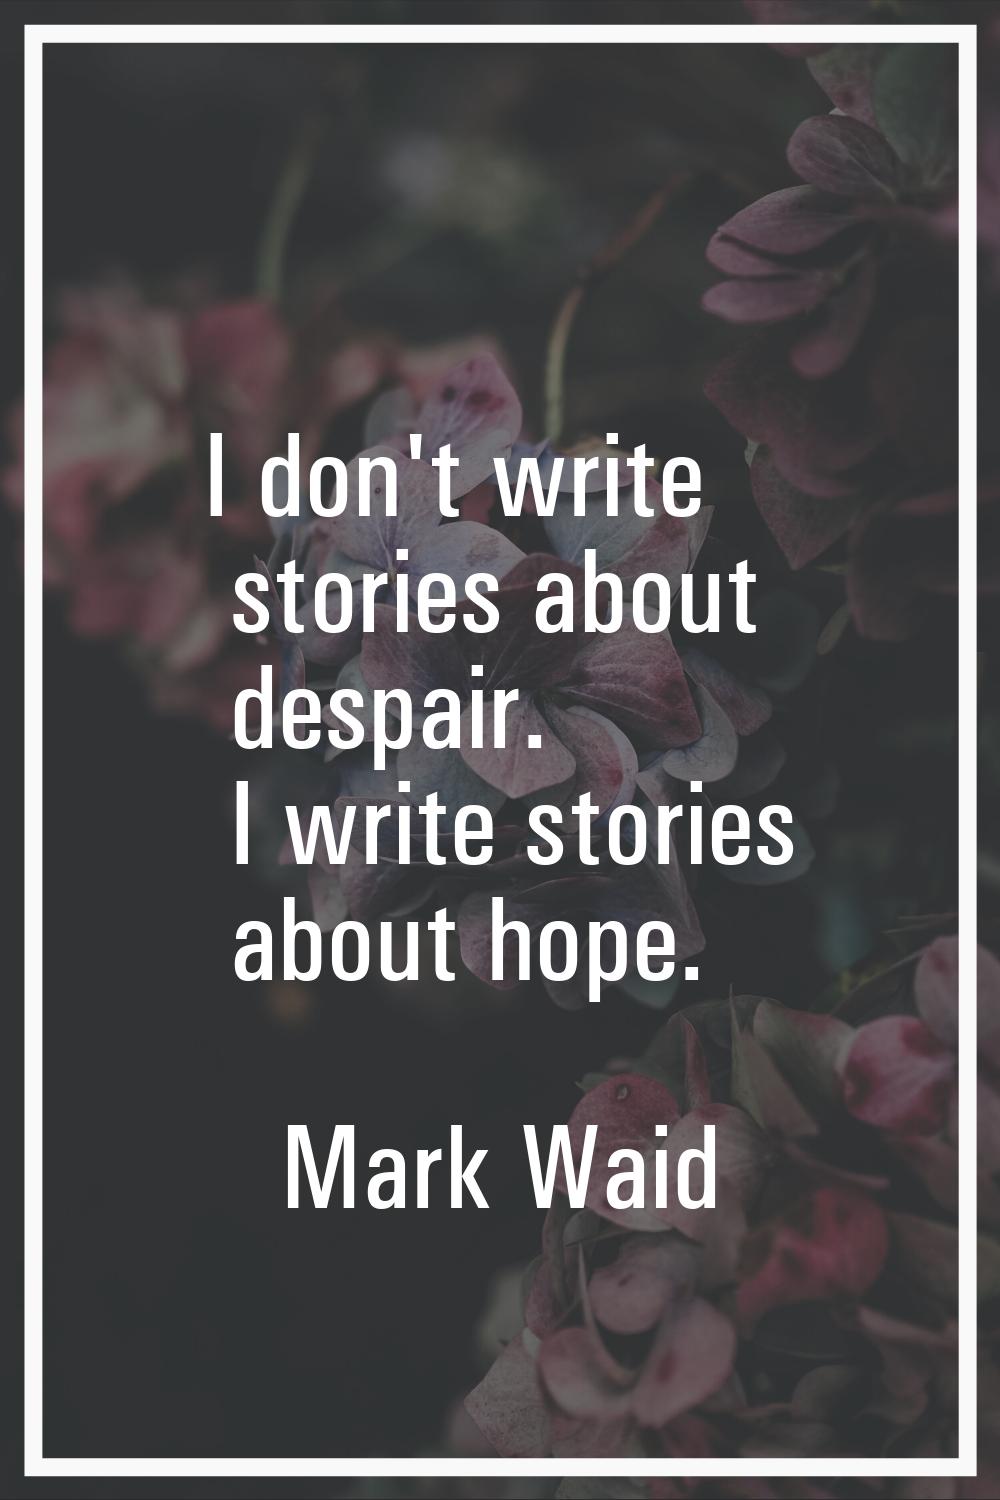 I don't write stories about despair. I write stories about hope.